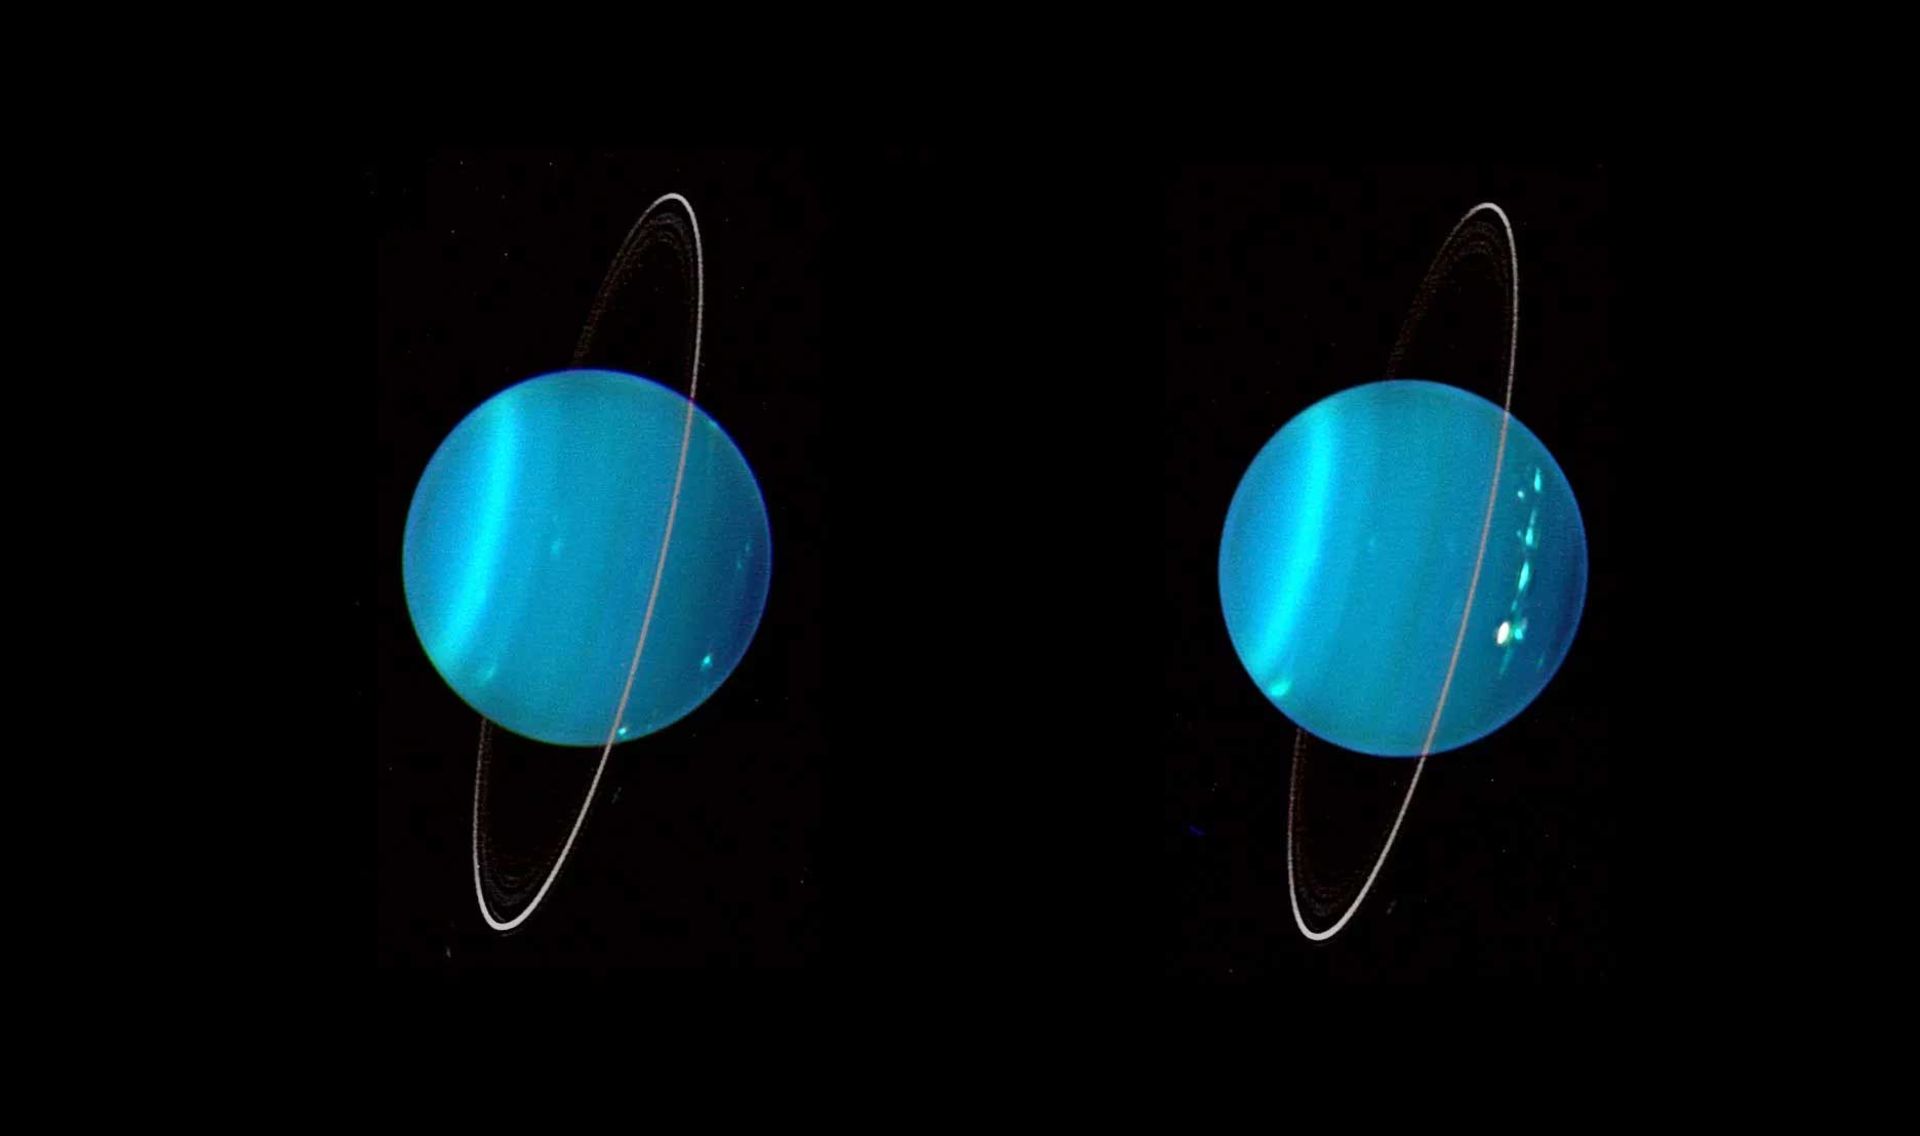 Composite image of the planet Uranus and its rings